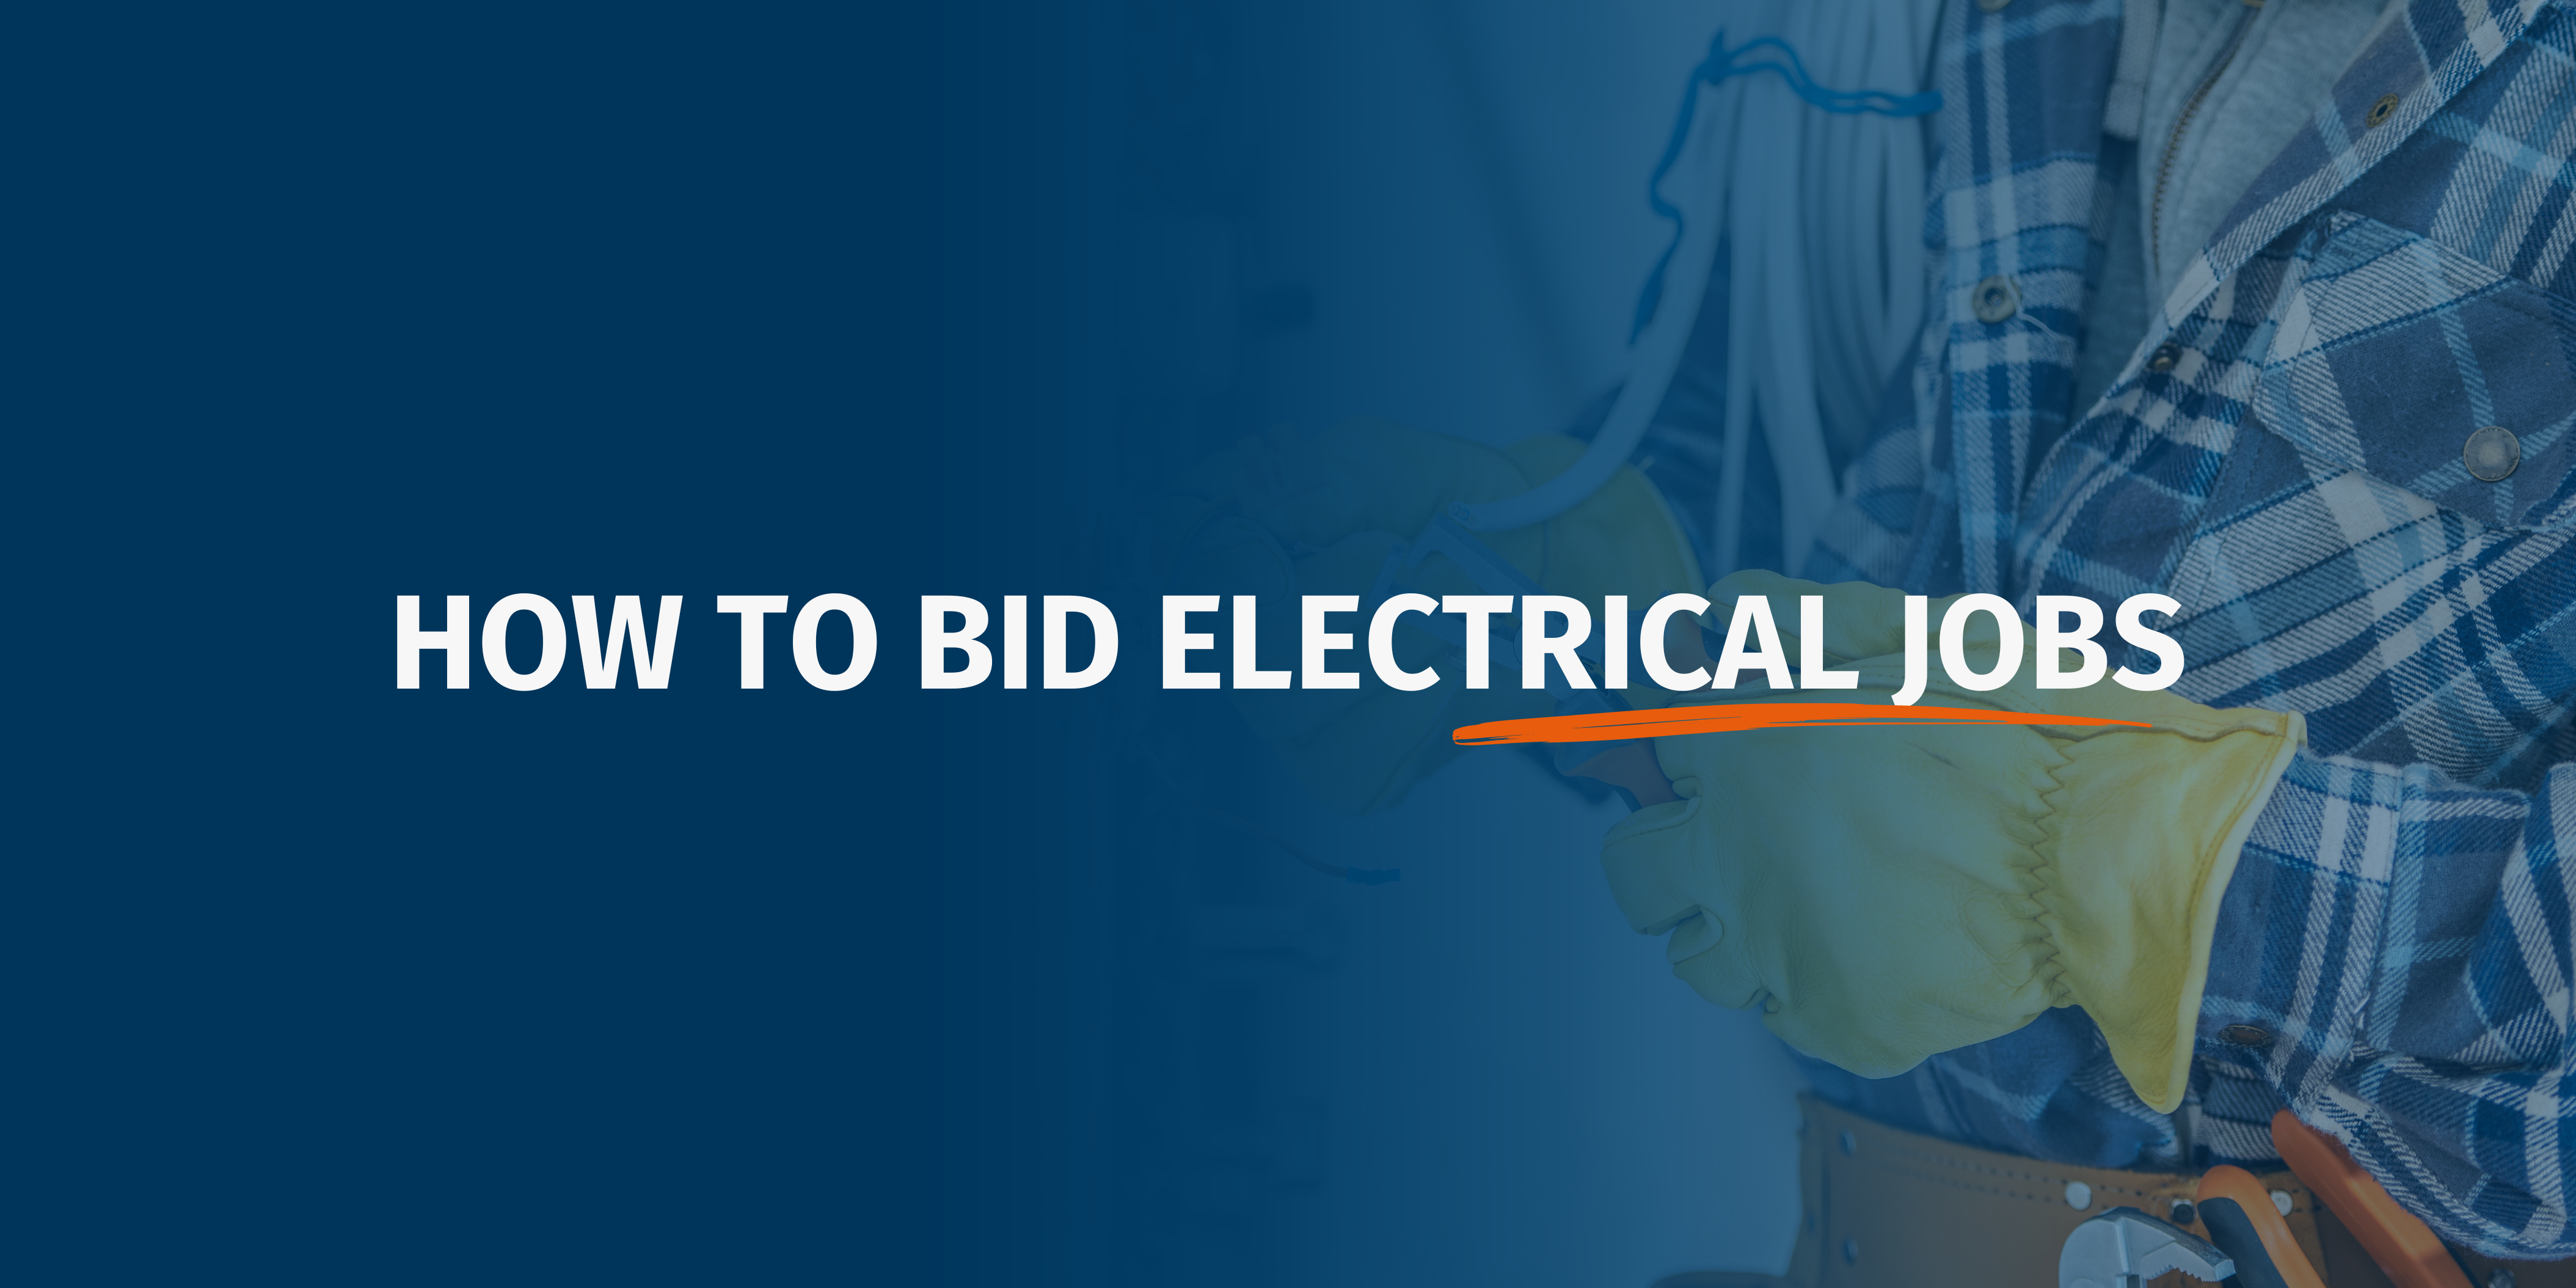 Quagmire fabrik Ejendommelige How to Bid Electrical Jobs: 8 Tips to Help You Land Your Next Project